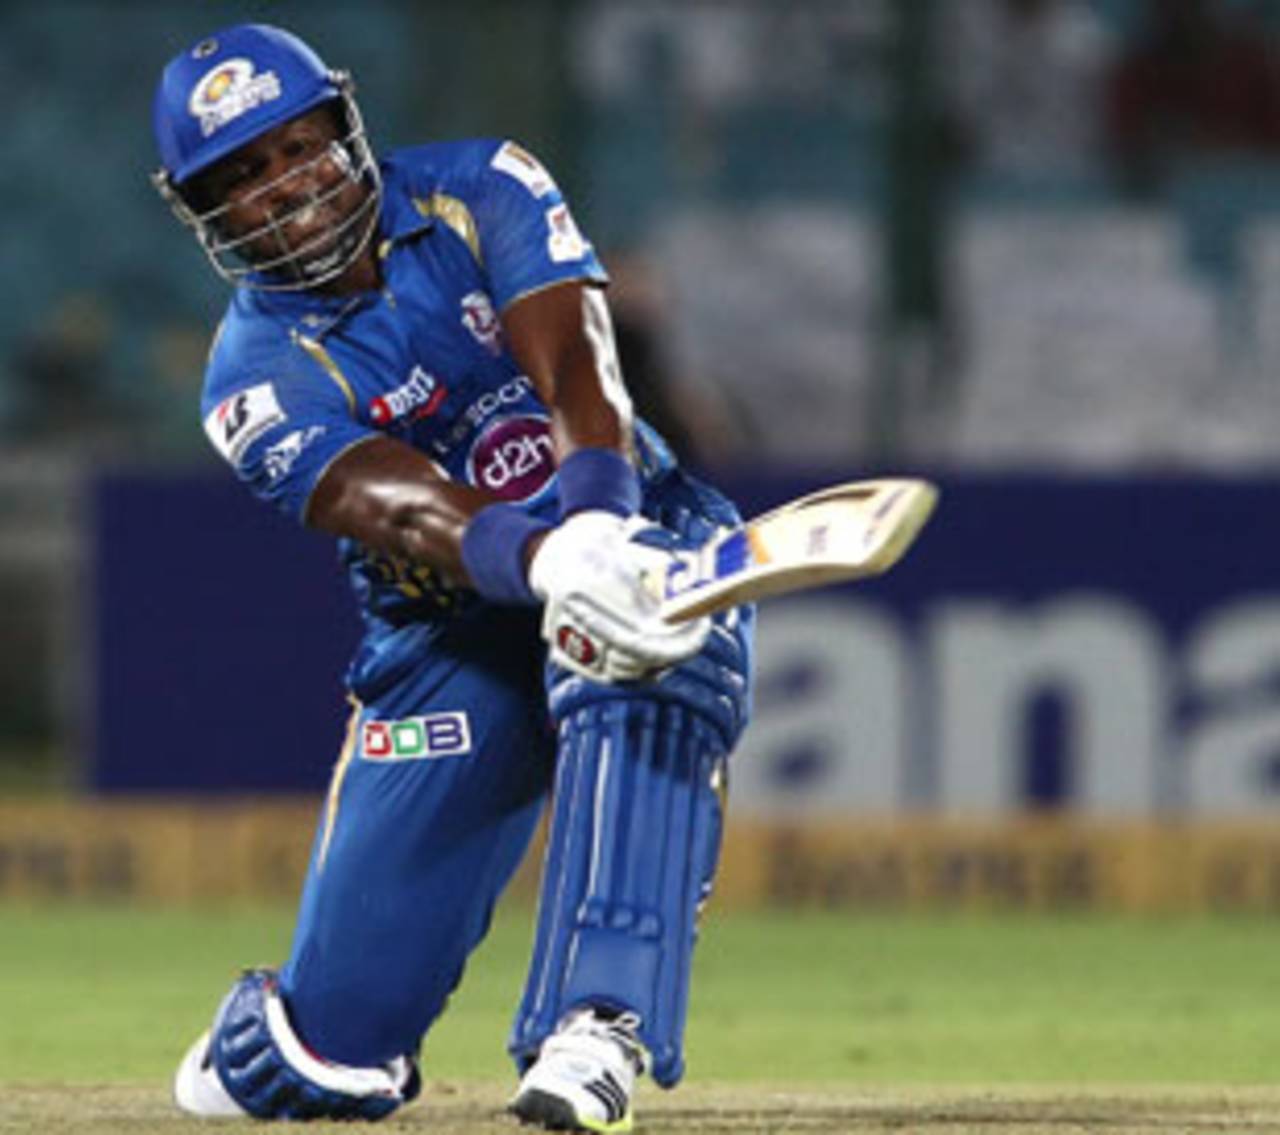 Dwayne Smith did not fly to Australia due to "personal reasons"&nbsp;&nbsp;&bull;&nbsp;&nbsp;BCCI